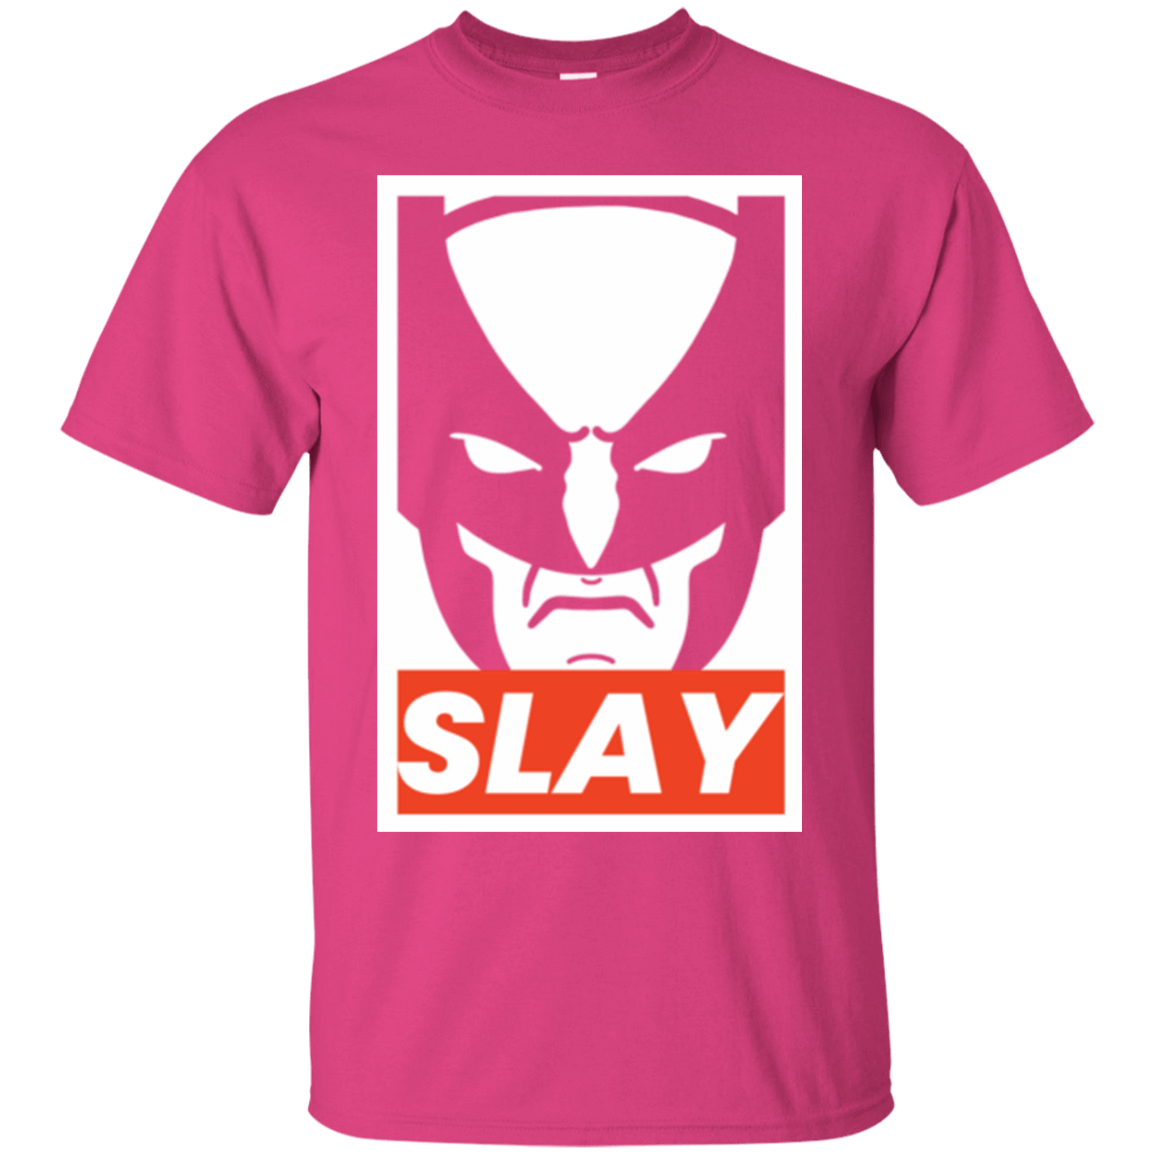 T-Shirts Heliconia / S SLAY T-Shirt